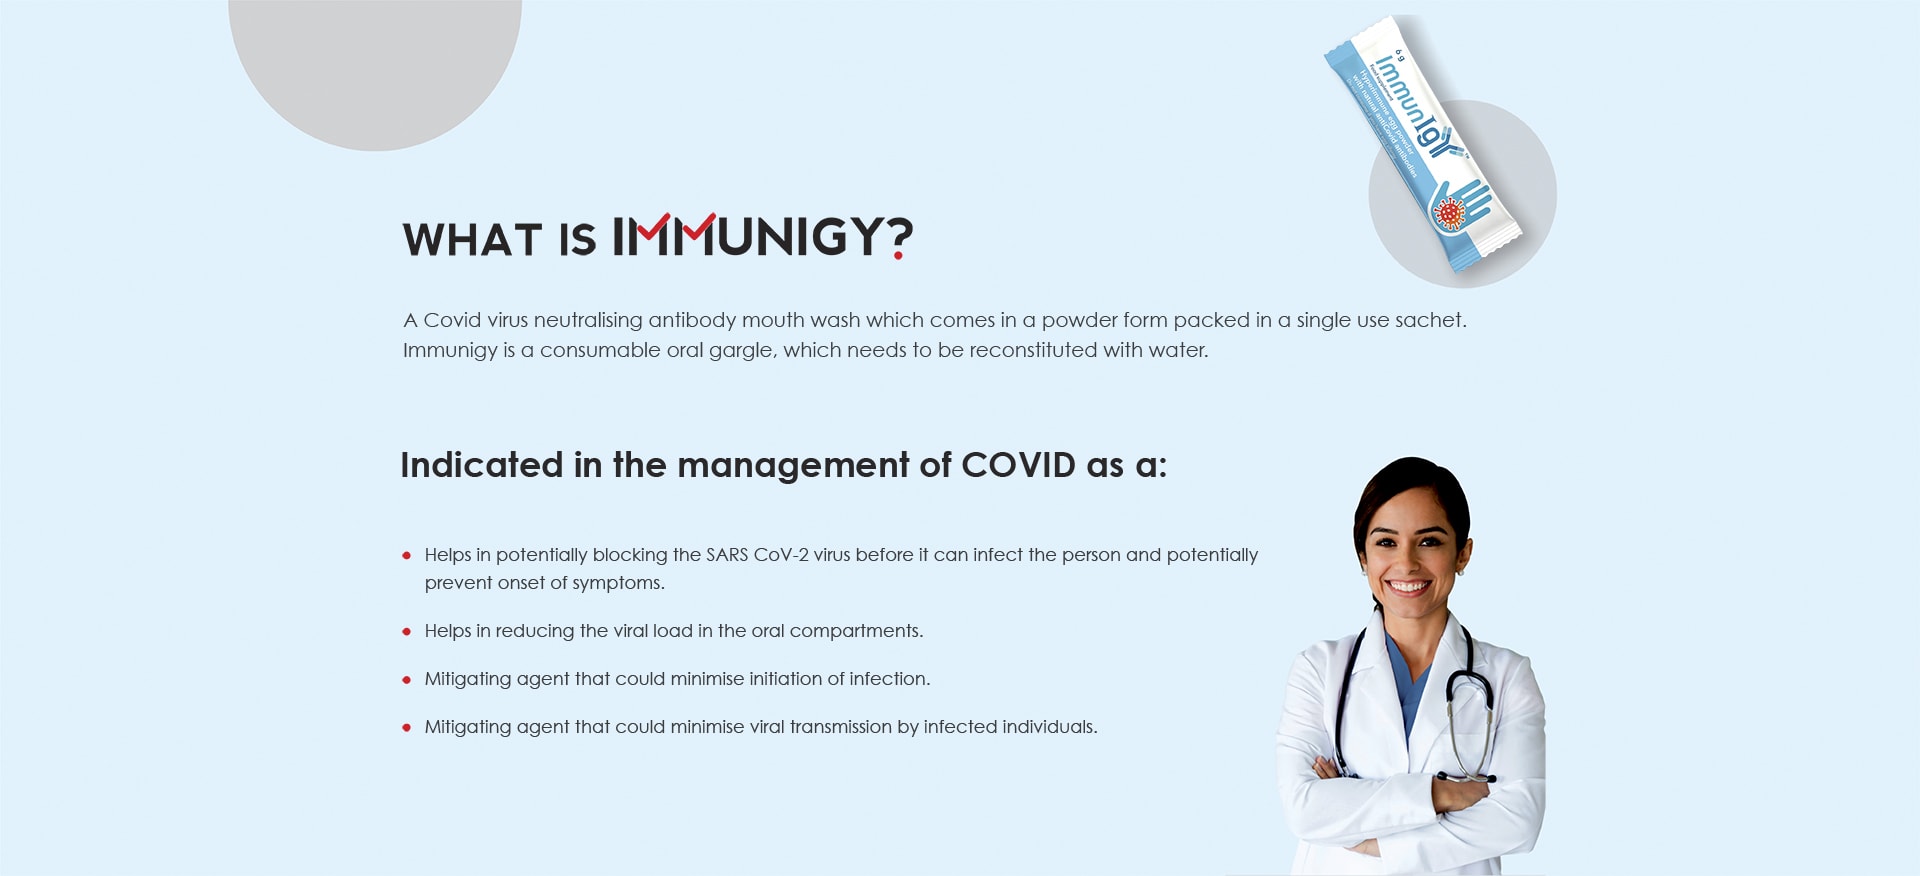 WHAT IS IMMUNIGY? A Covid virus neutralising antibody mouth wash which comes in a powder form packed in a single use sachet. Immunigy is a consumable oral gargle, which needs to be reconstituted with water. Indicated in the management of COVID: Helps in potentially blocking the SARS CoV-2 virus before it can infect the person and potentially prevent onset of symptoms. Helps in reducing the viral load in the oral compartments. Mitigating agent that could minimise initiation of infection. Mitigating agent that could minimise viral transmission by infected individuals.